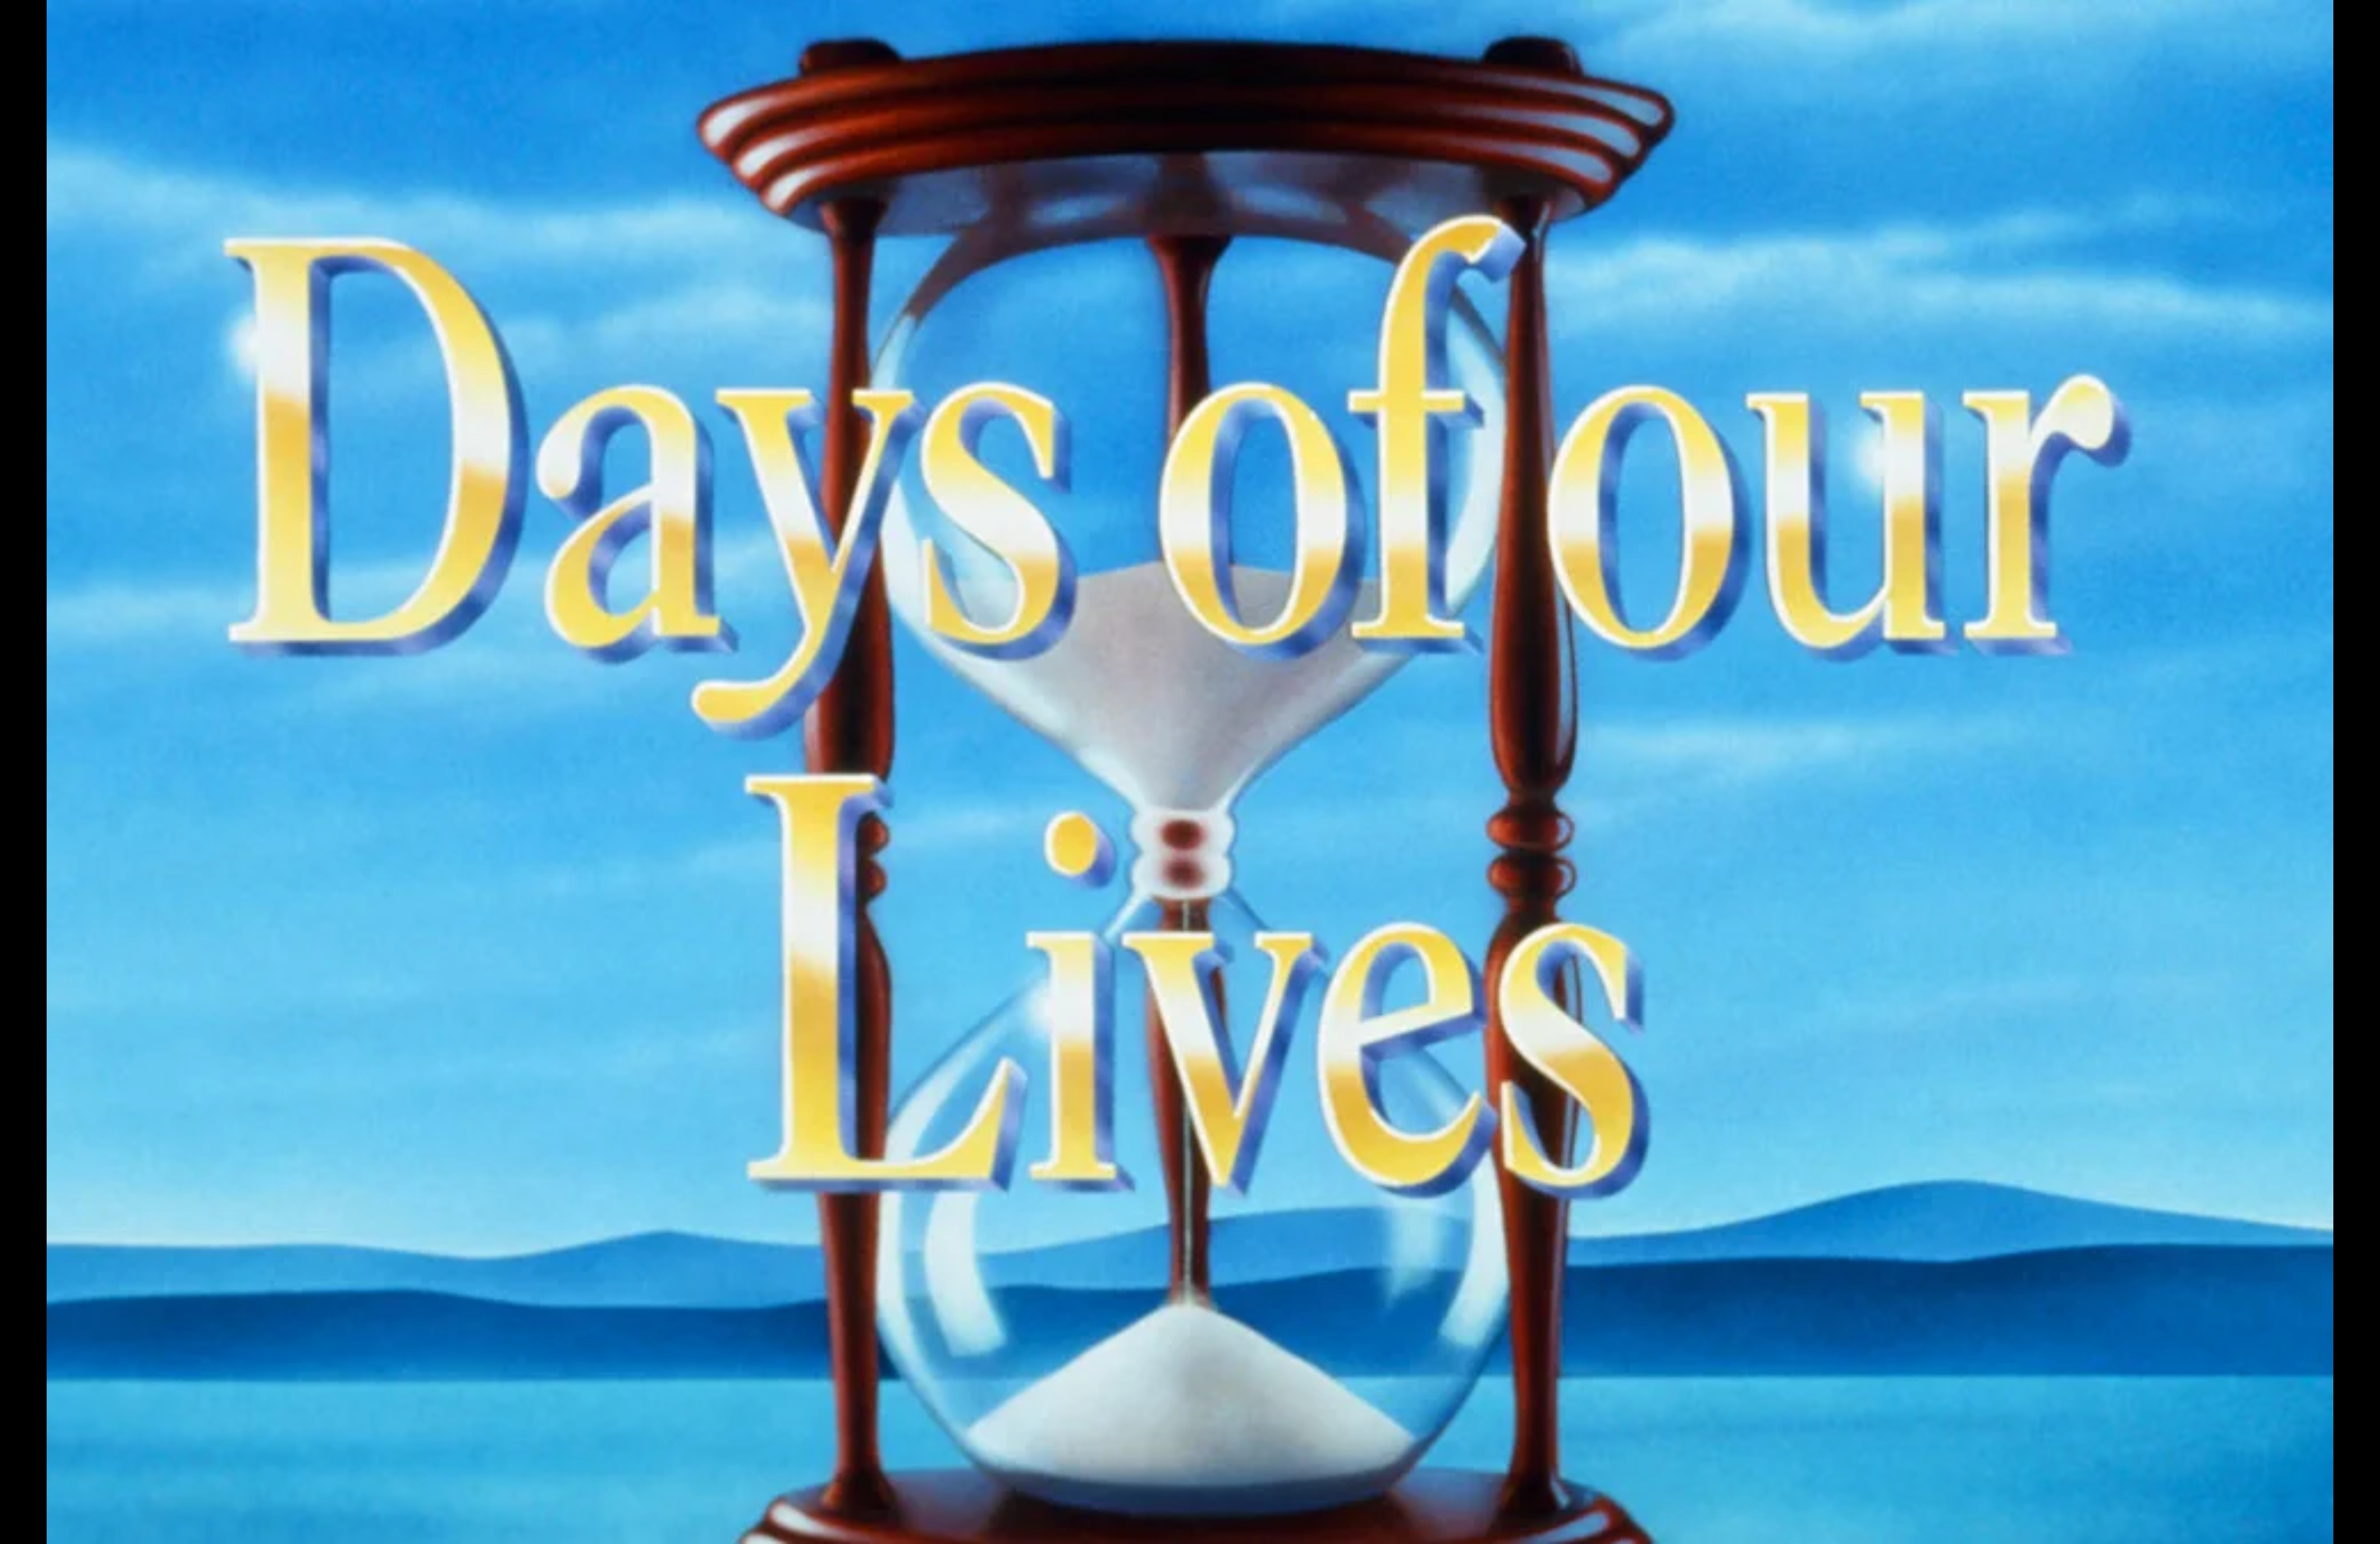 Days of Our Lives News: Shocking Cast Changes!